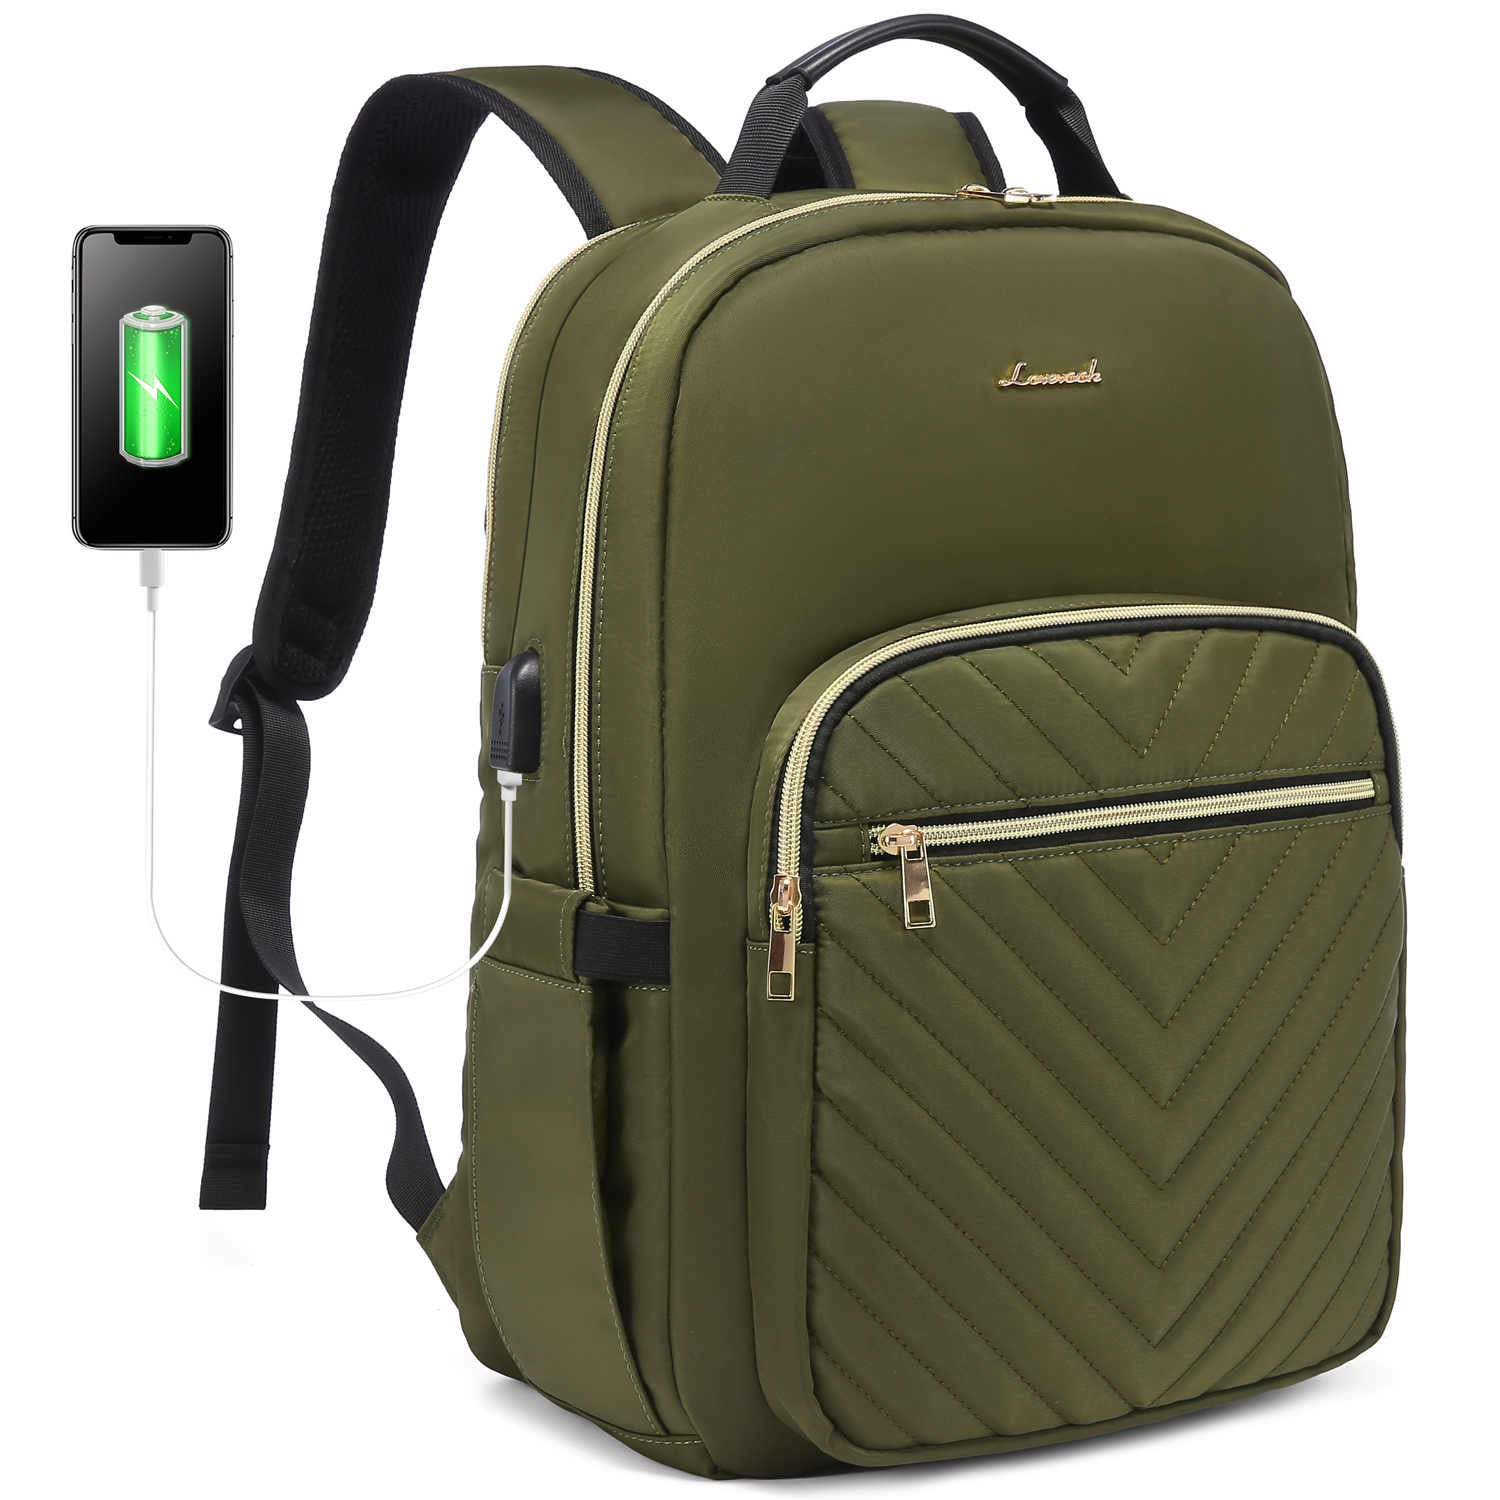 The V Backpack | Lovevook - Stylish & Functional for All Needs